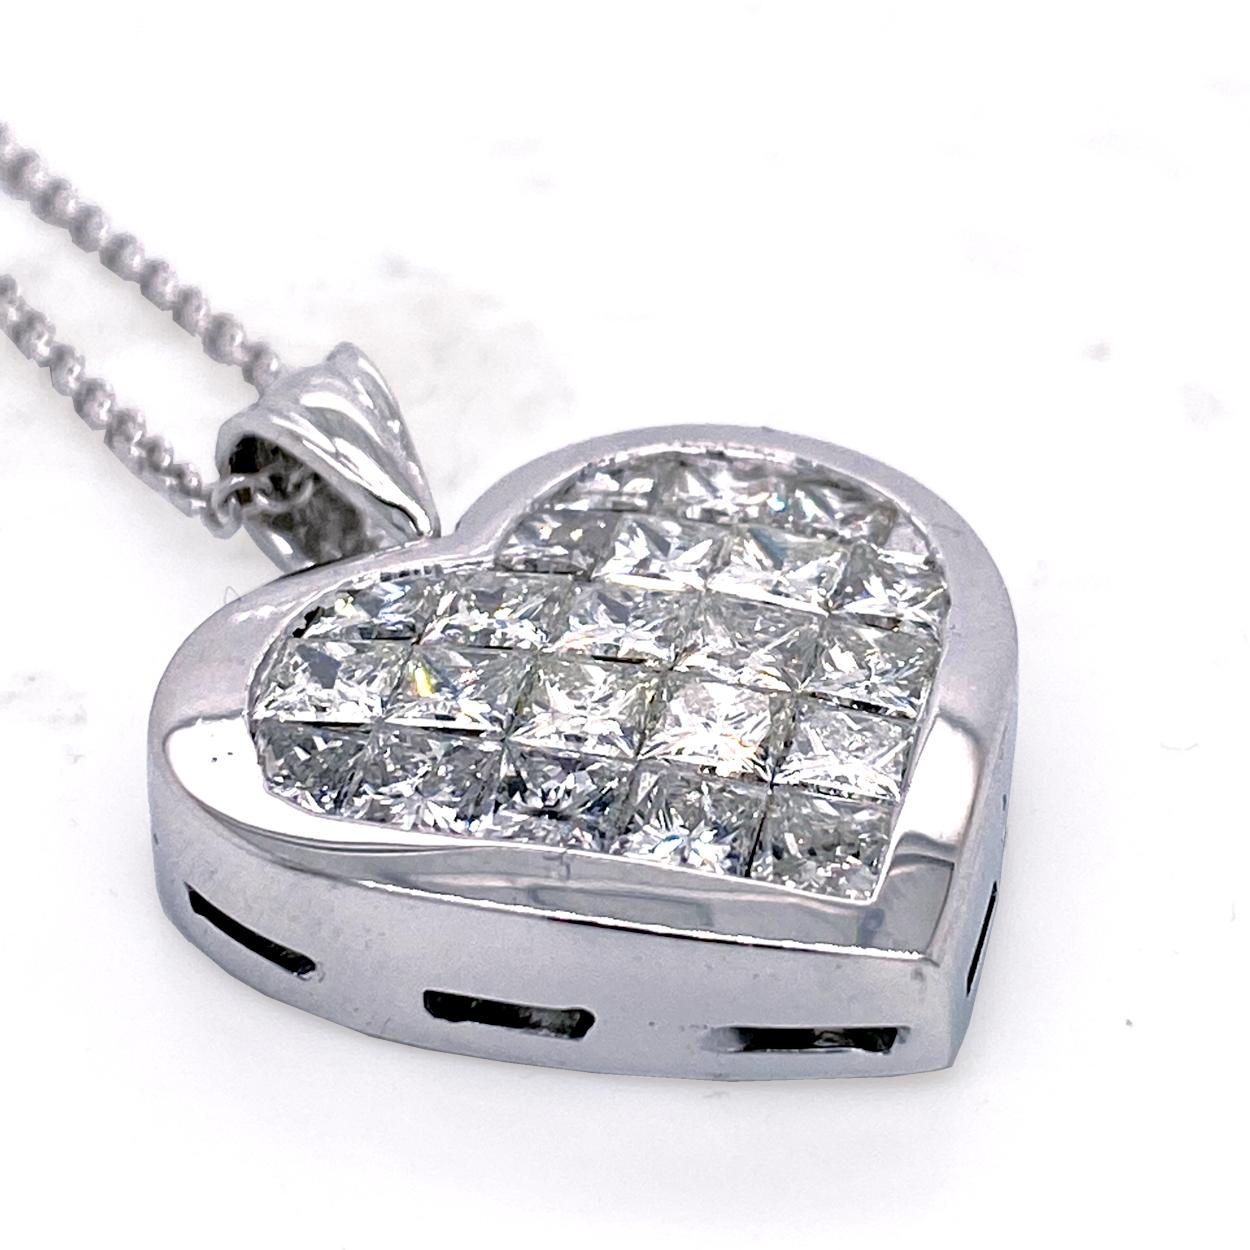 14K Gold Heart shaped Pendant with 25 Invisible Set 3.5 mm Princess Cut Diamonds with total weight of 5.30 Ct H-I/SI1-SI2). A beautiful gallery (back) allows light to go through and provide maximum shine.
Total Diamond Weight: 5.30 Ct